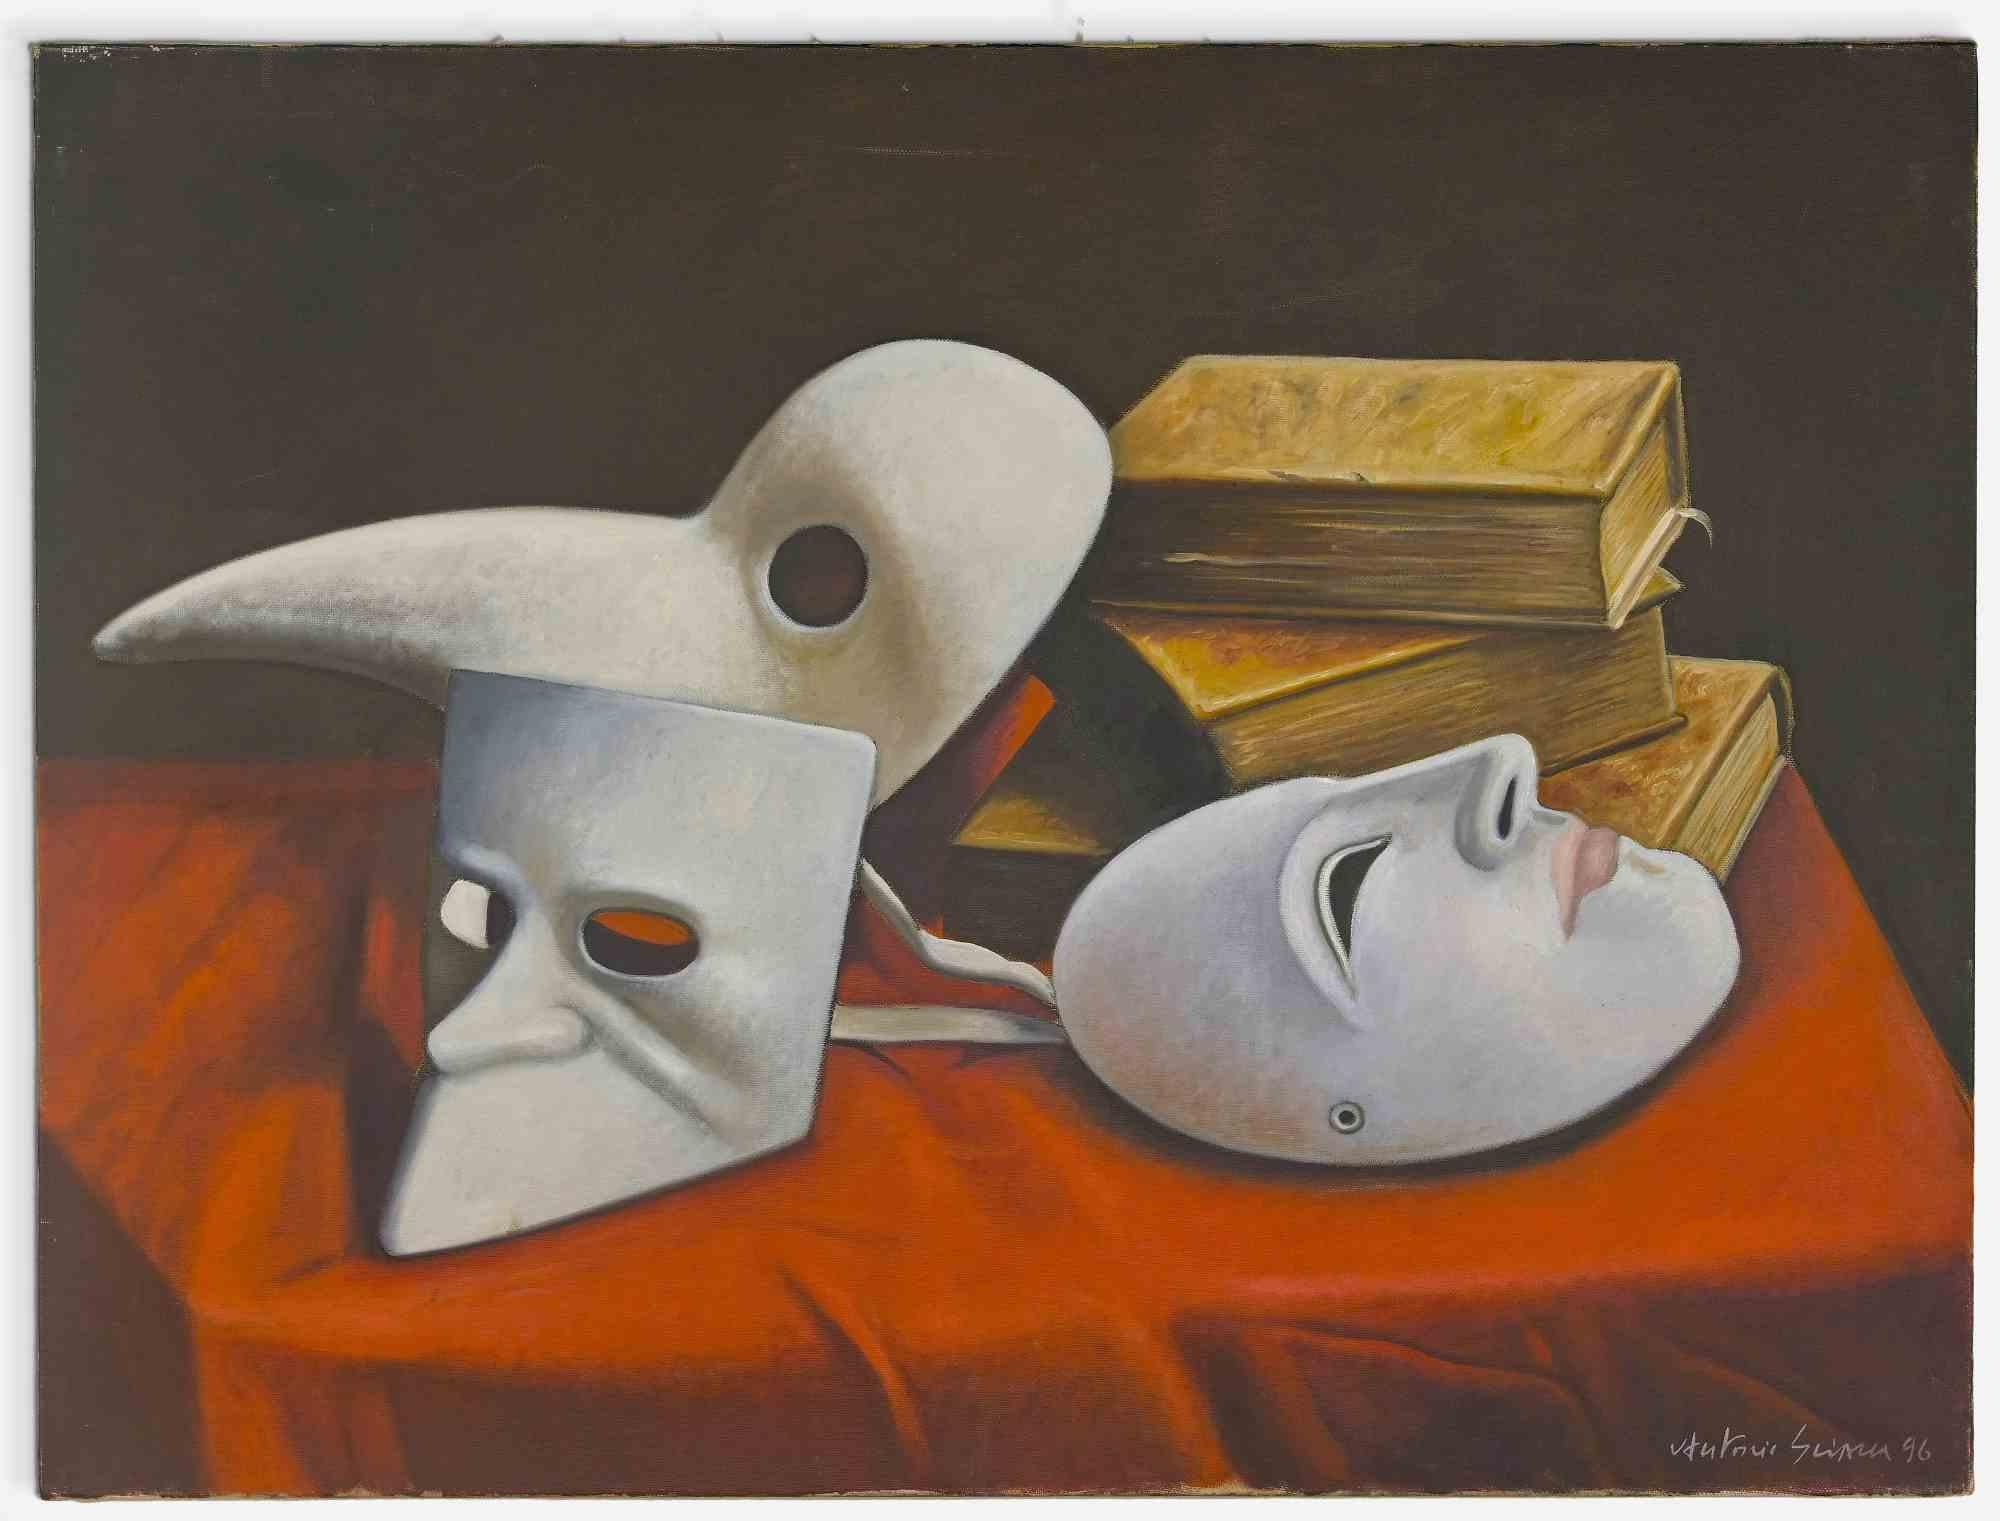 Still Life with Mask and Books - Oil Paint by Antonio Sciacca - 1996